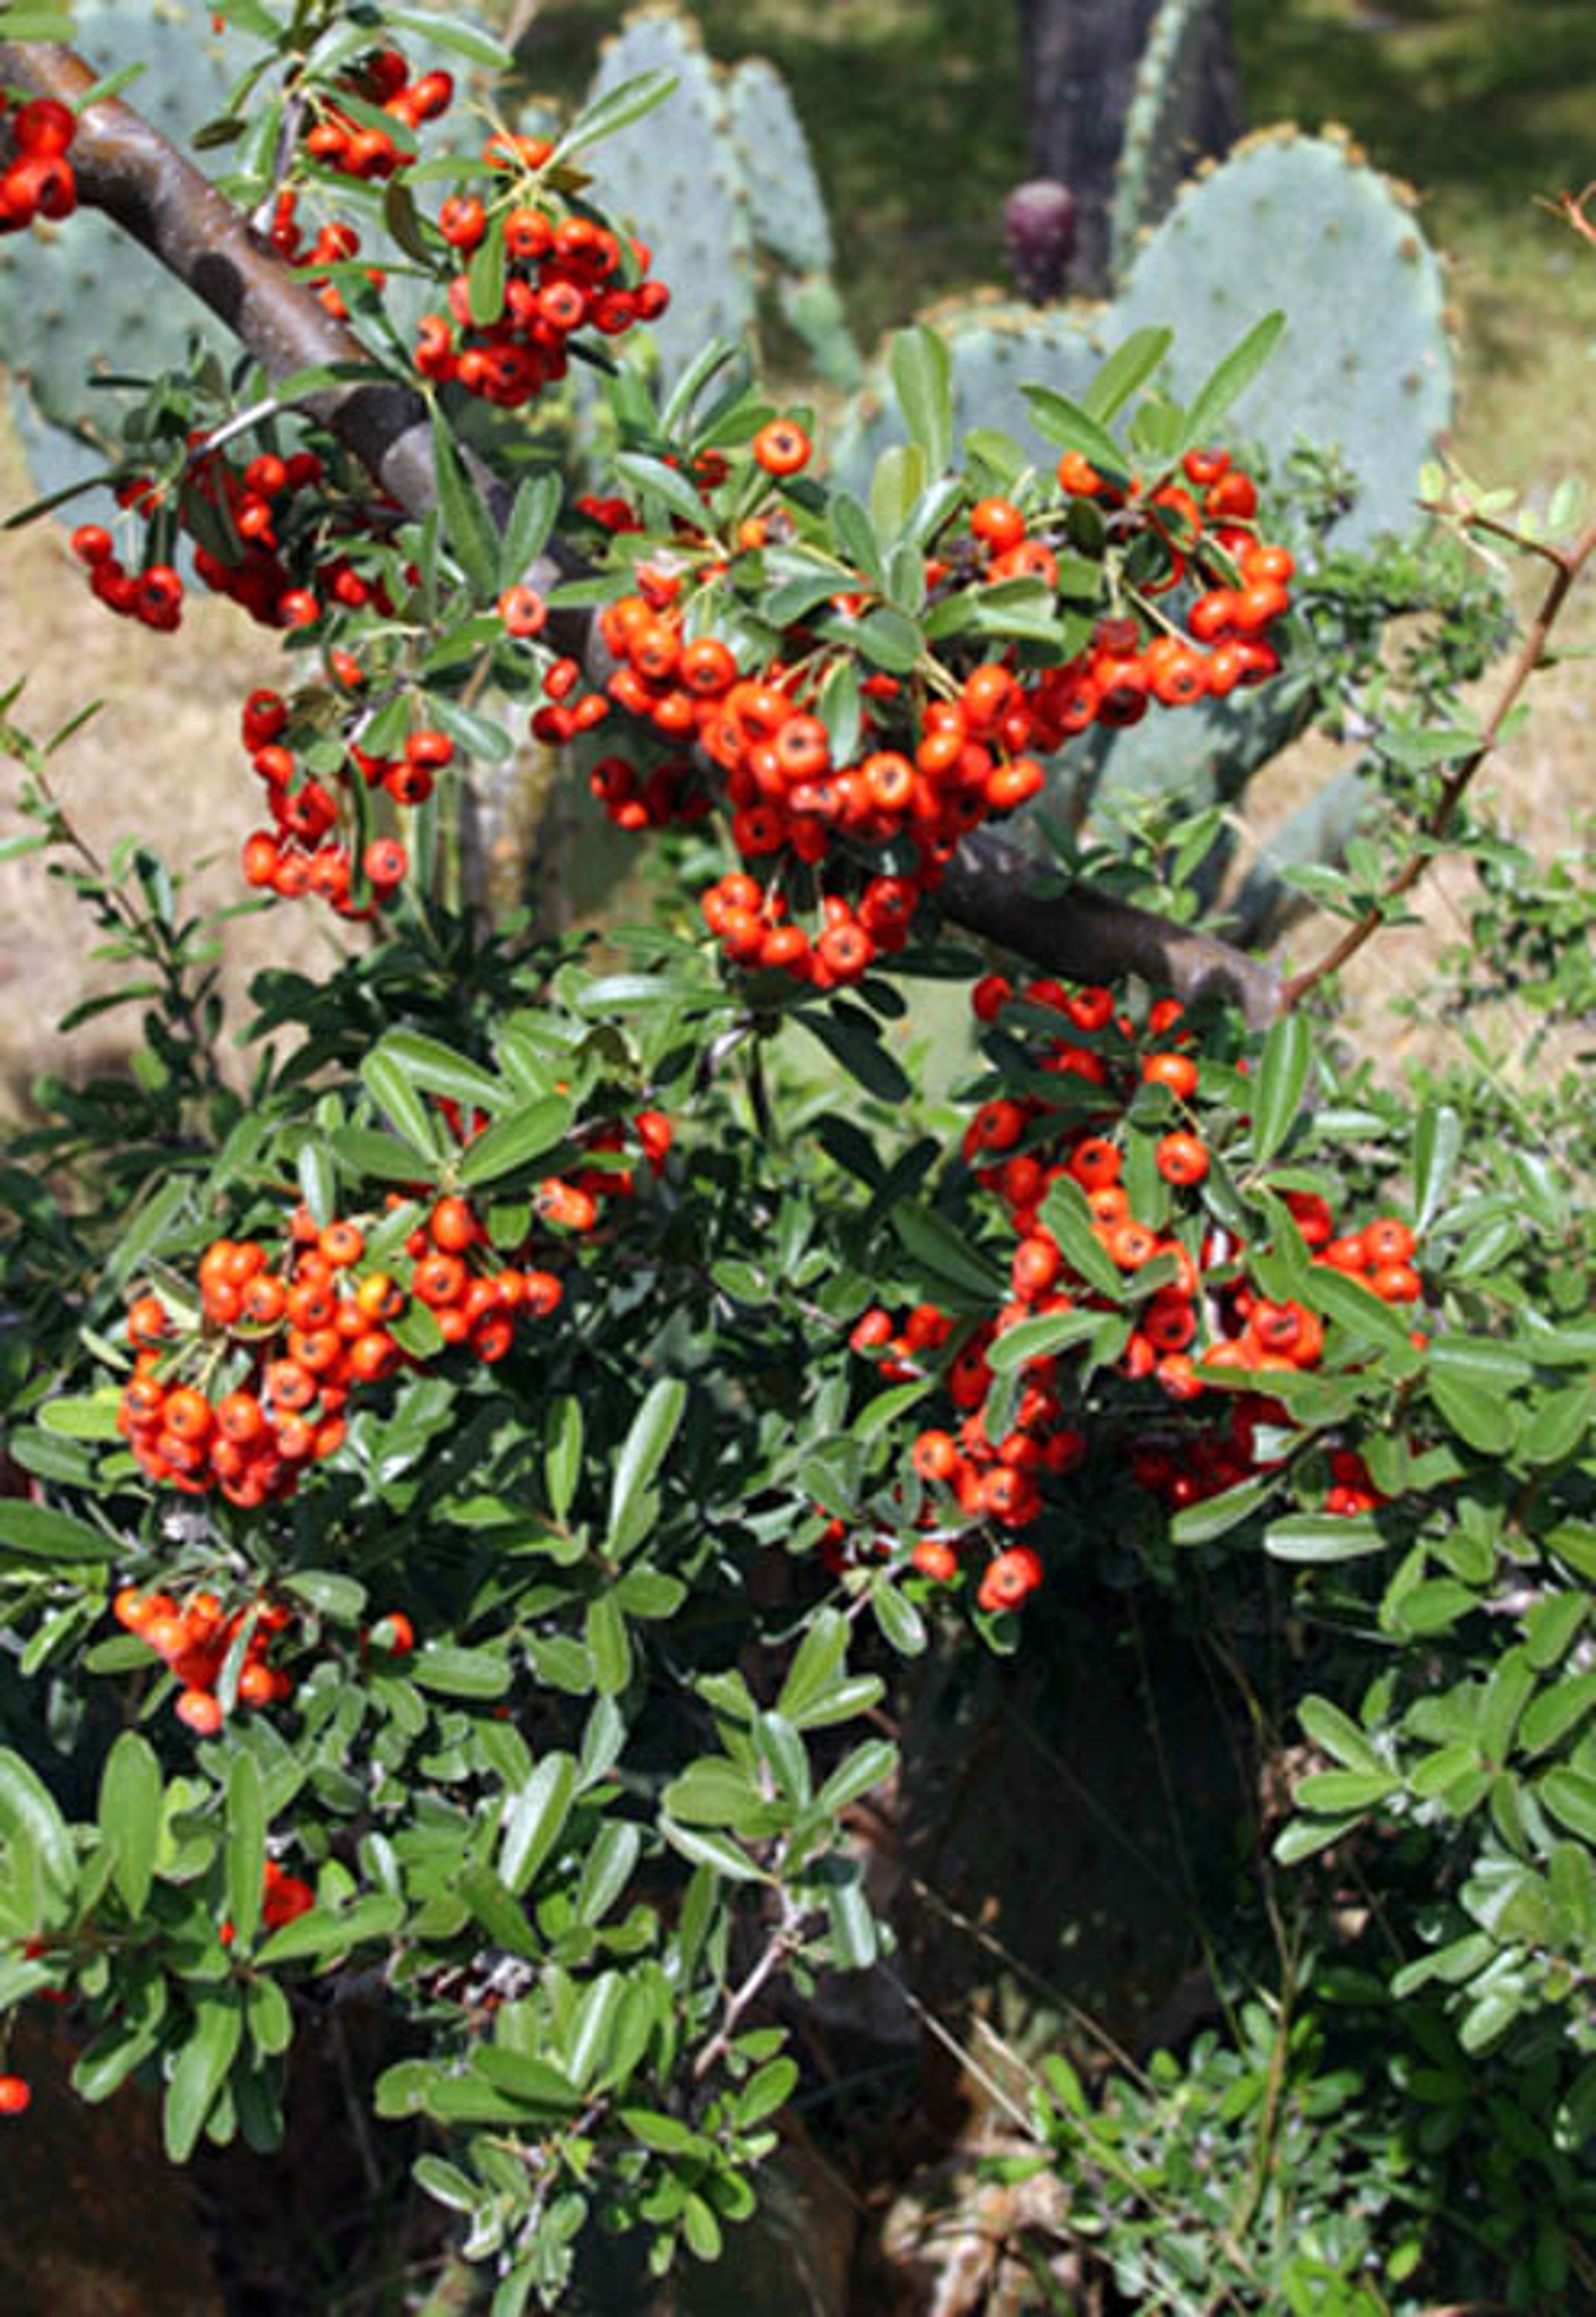 Pyracantha & Cactus Bloom by Rob Pitzer